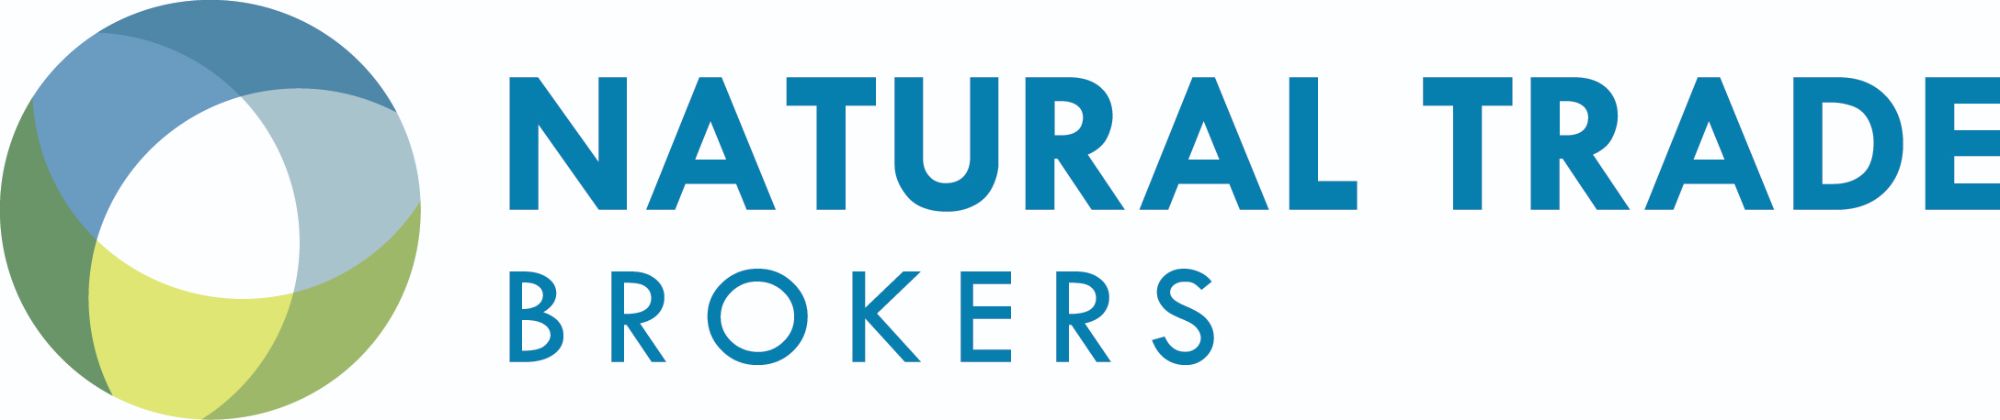 Natural Trade Brokers The leading sales brokerage team for the independent health food trade